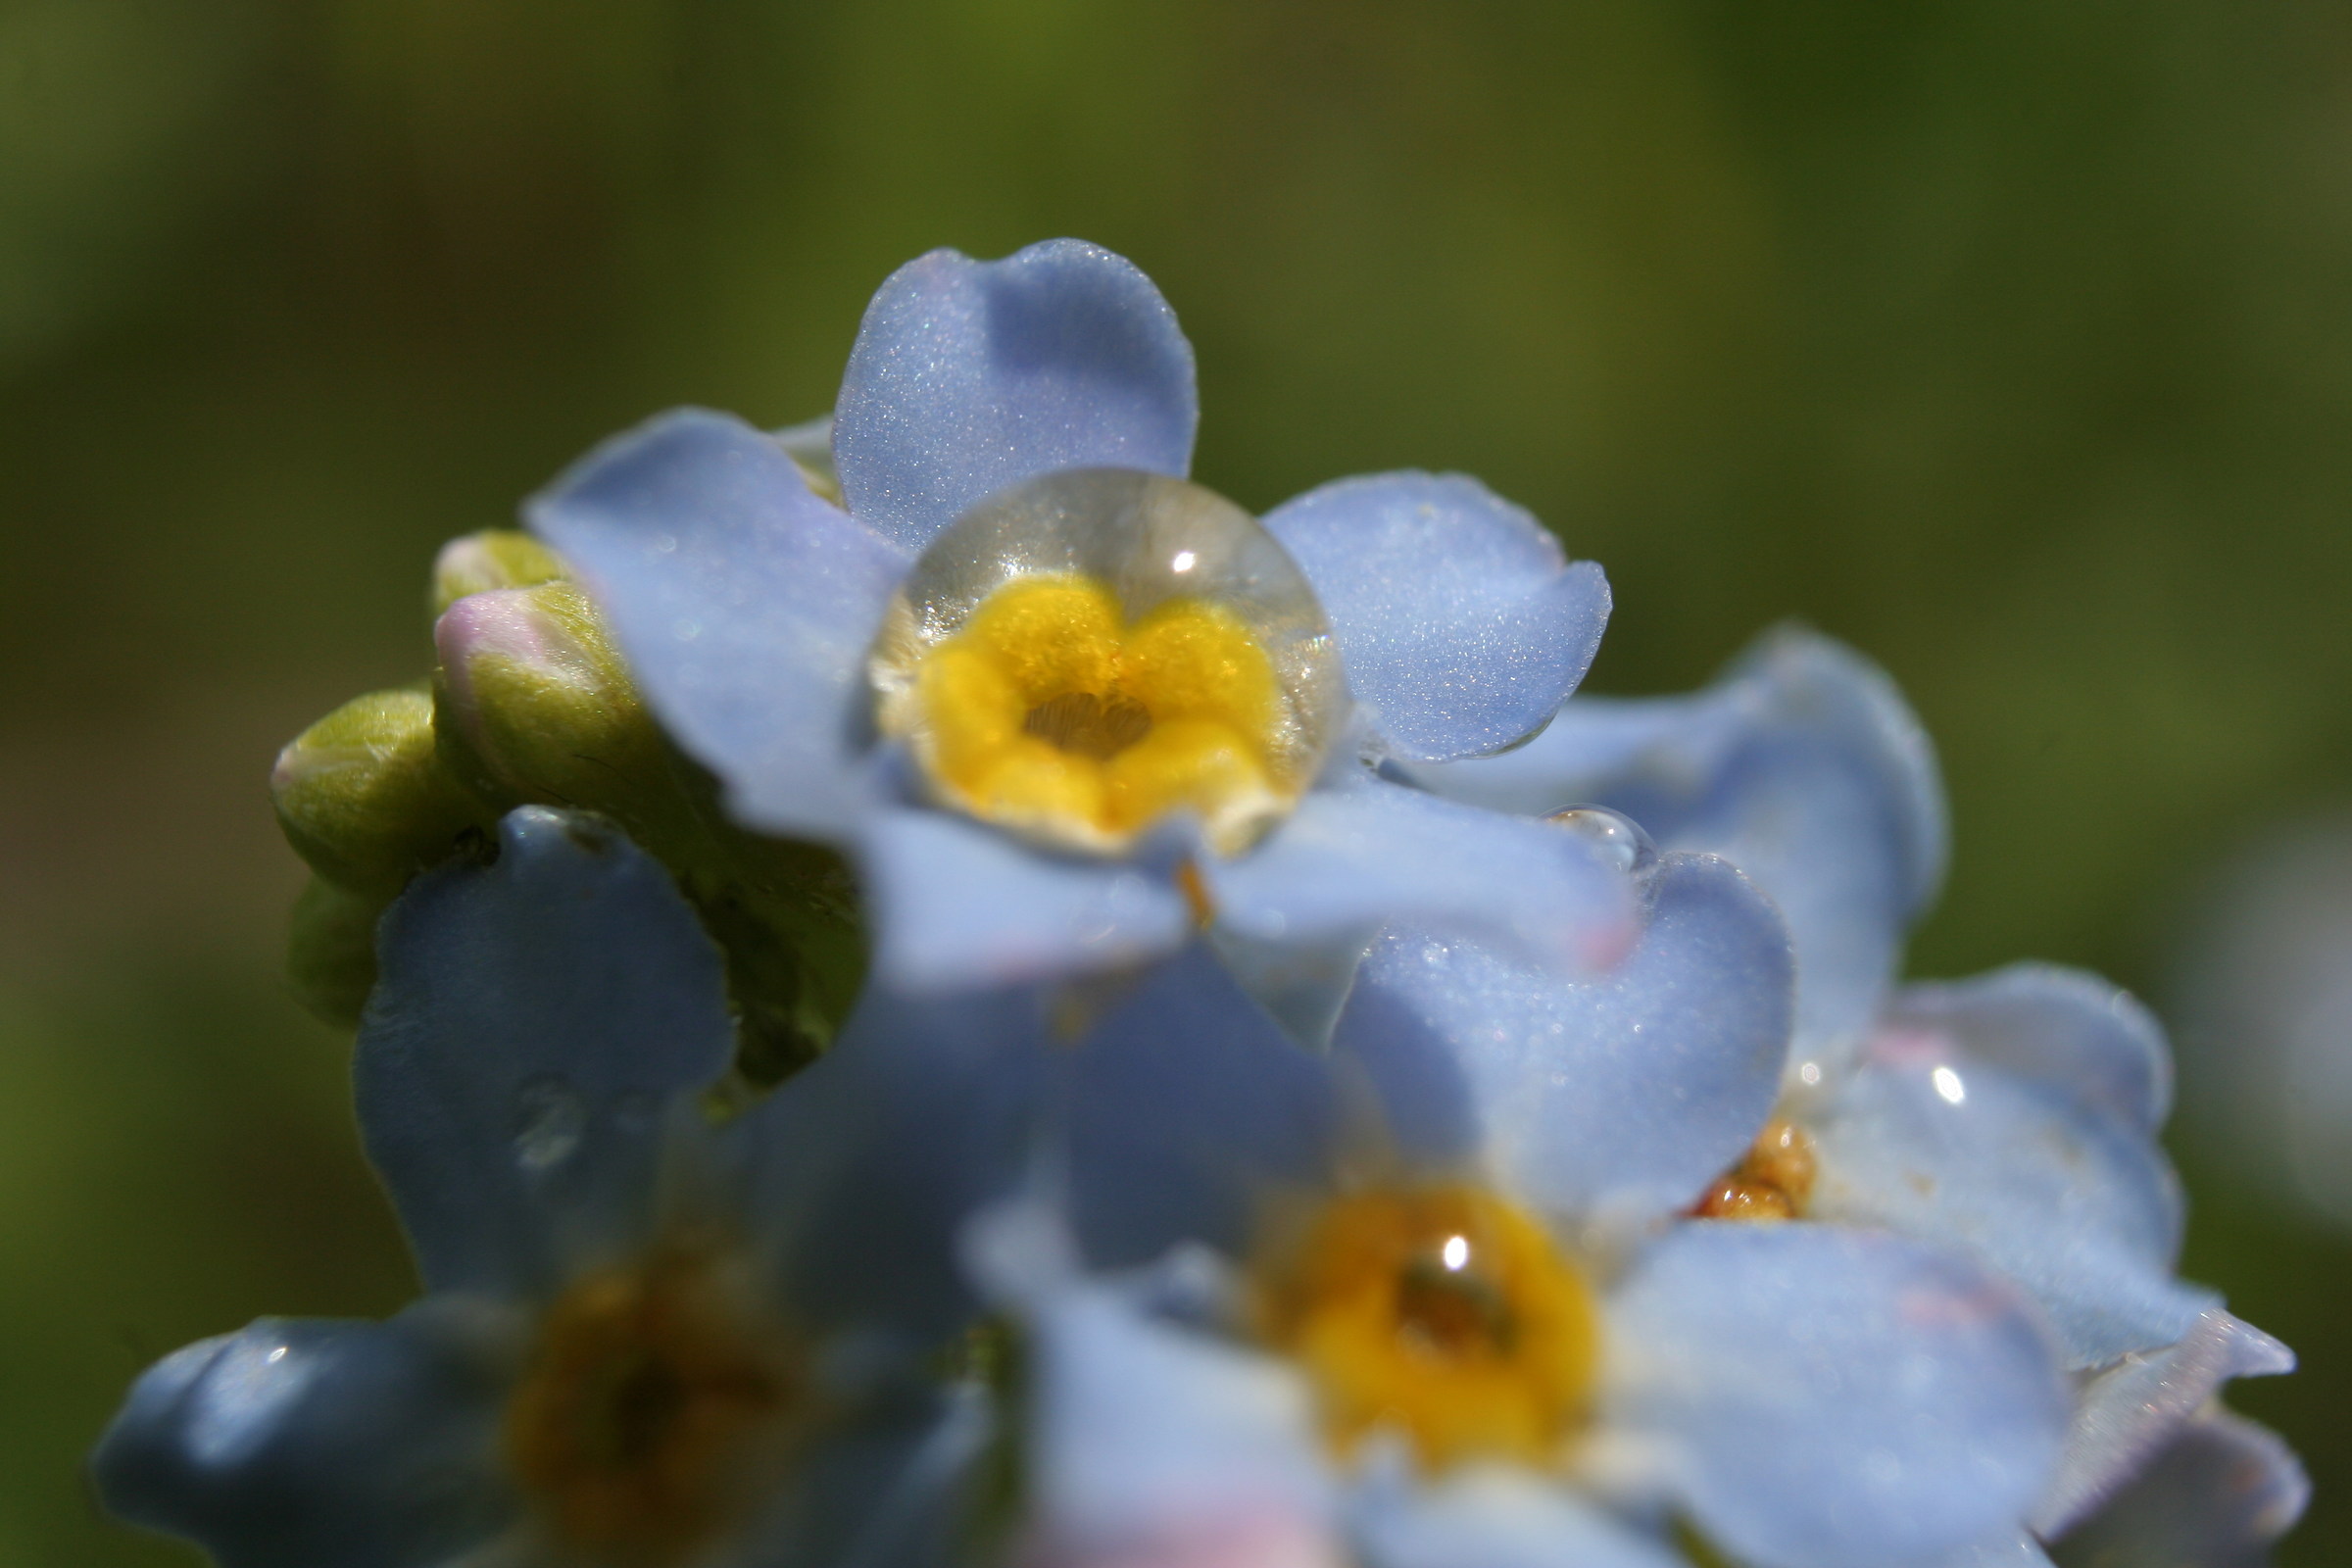 Drops of dew on Do not forget about me - Myosotis...